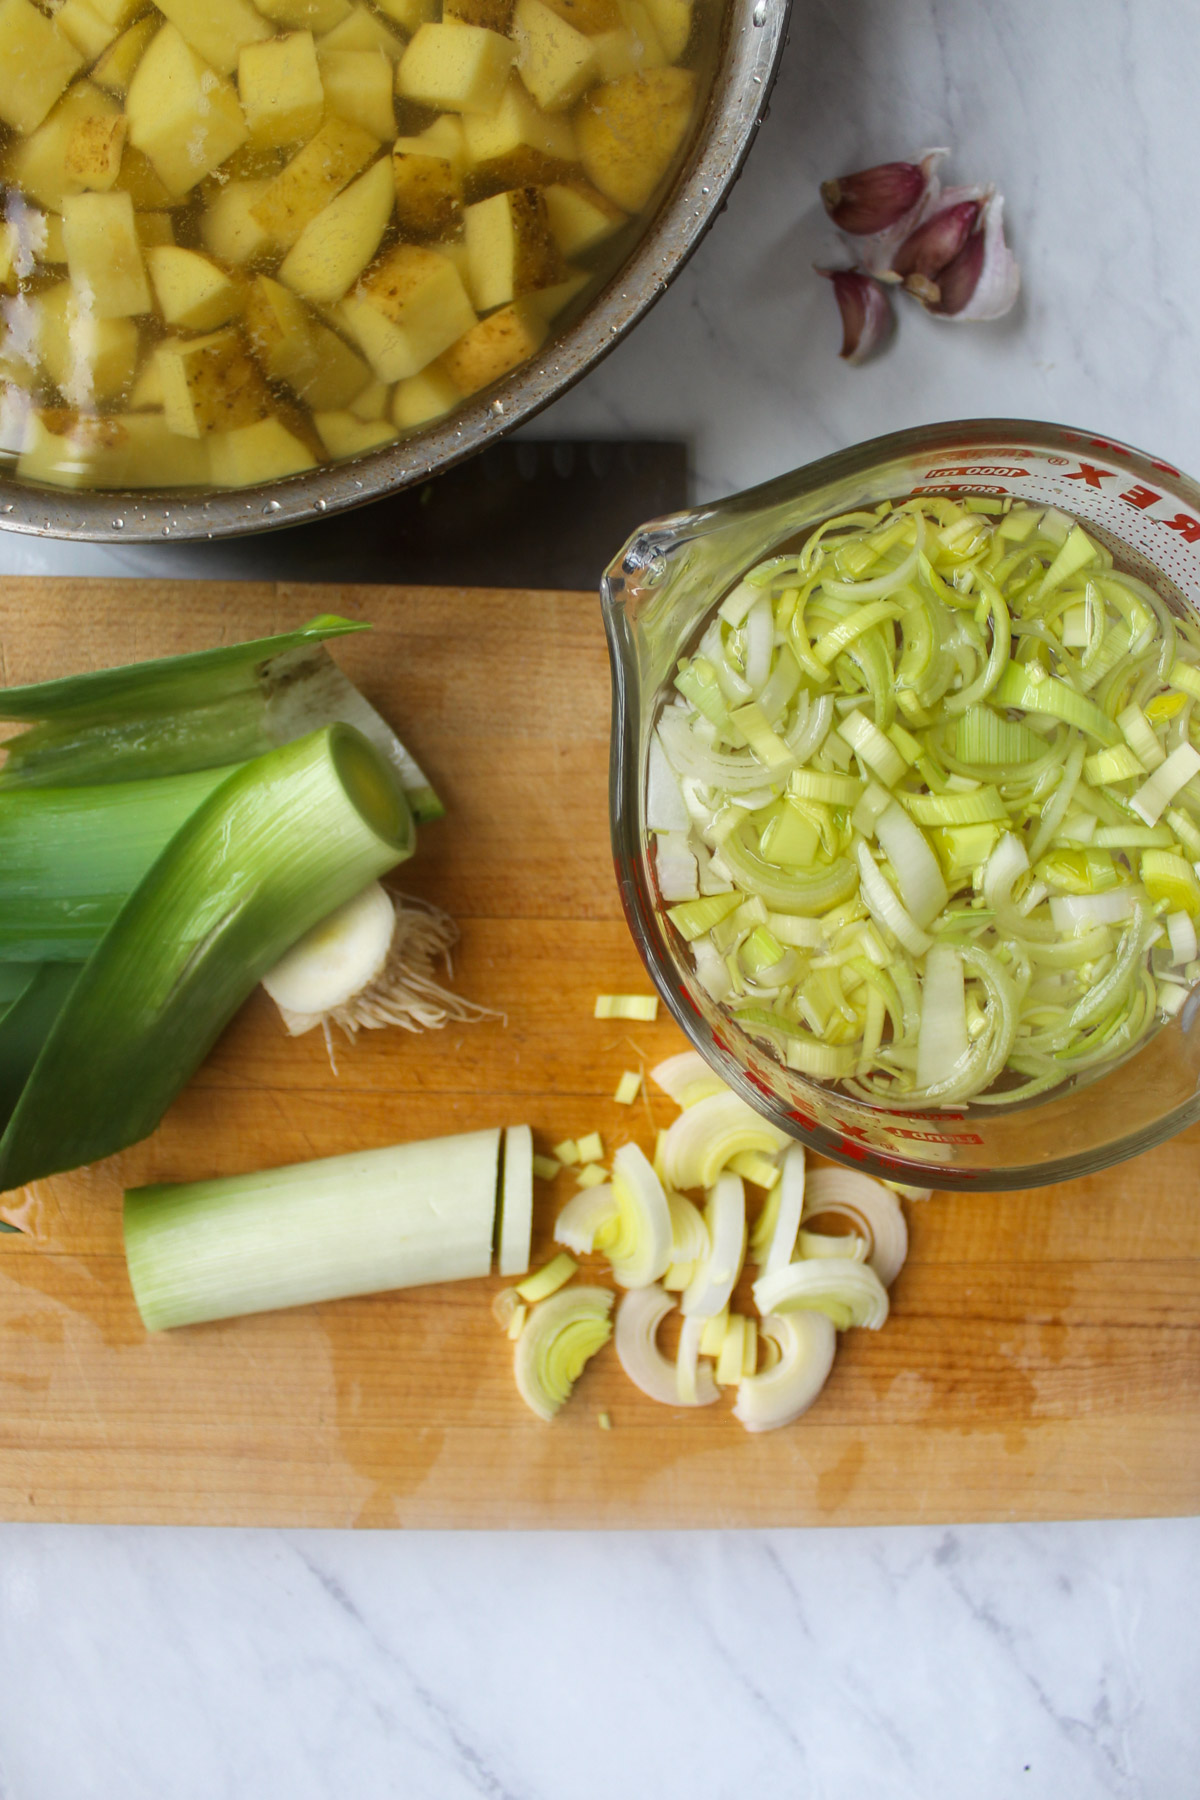 Slicing leeks on a cutting board into a bowl of water to wash off dirt.